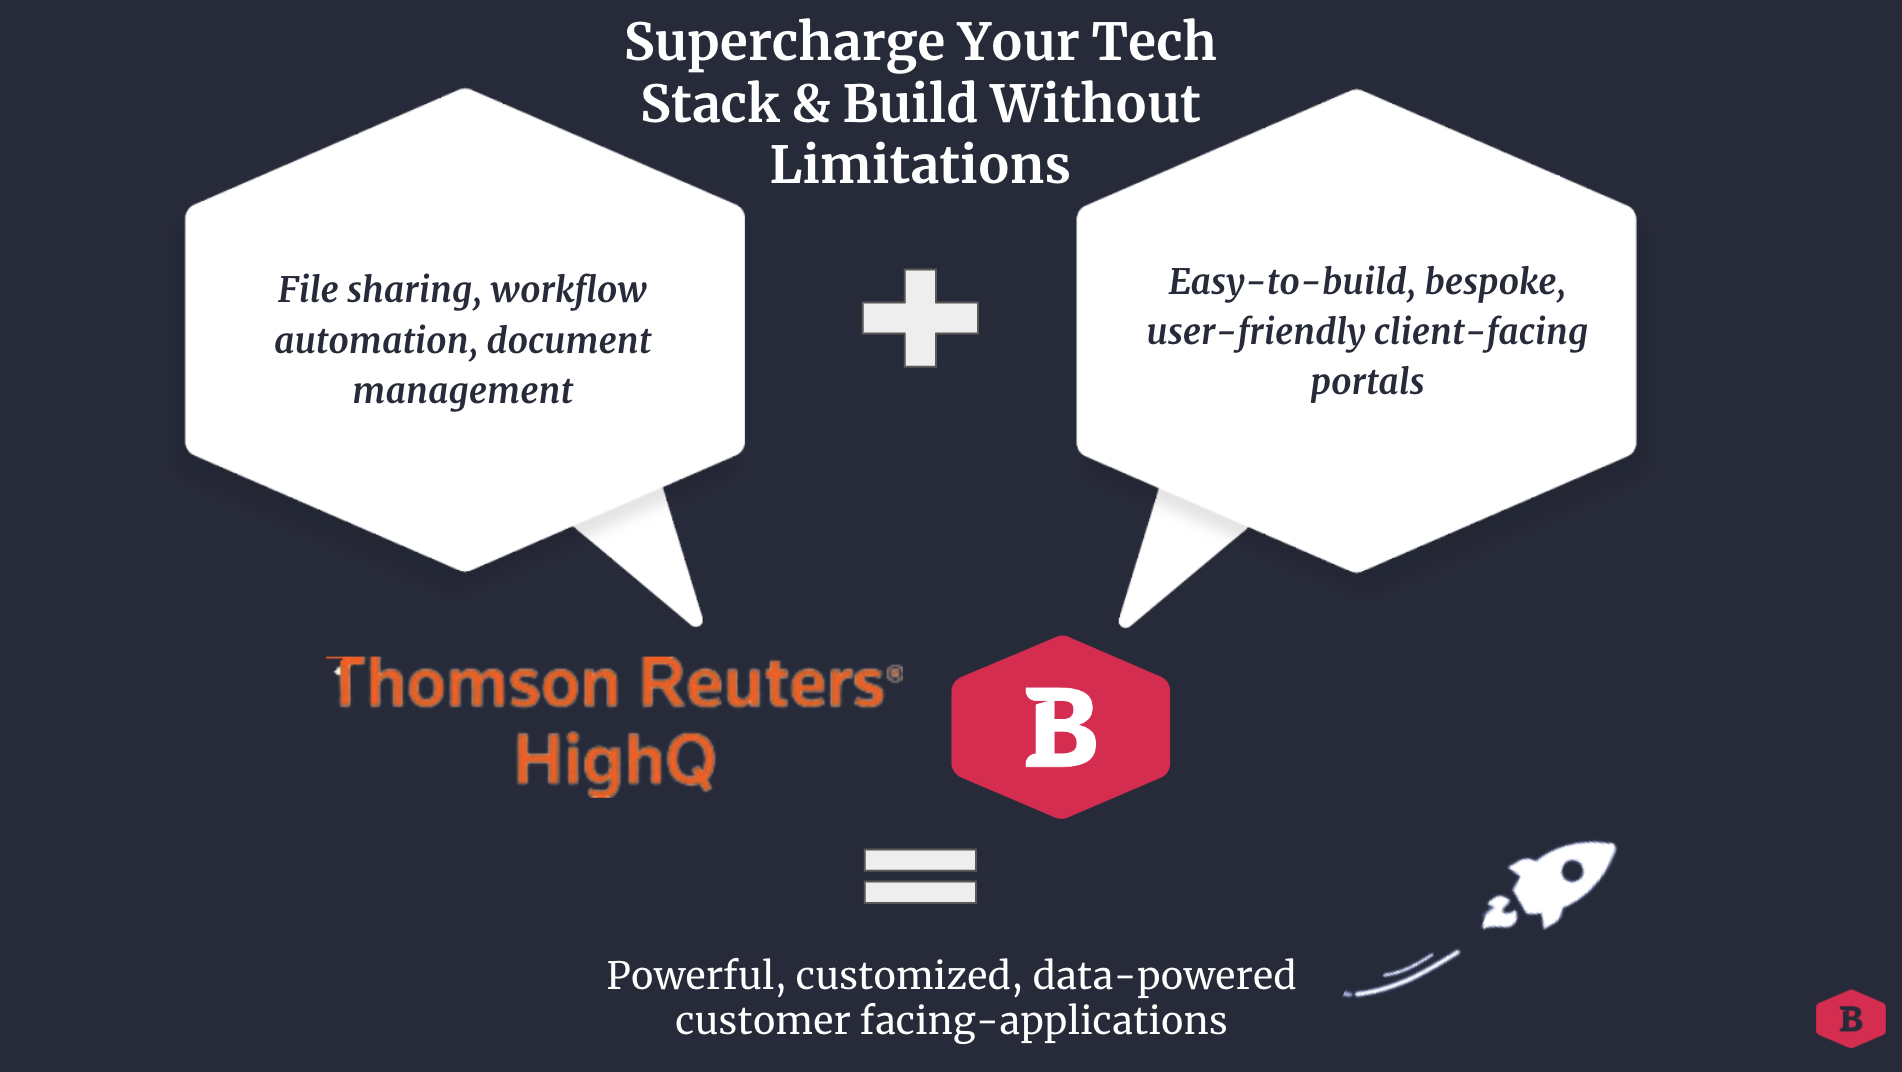 Supercharge your tech stack